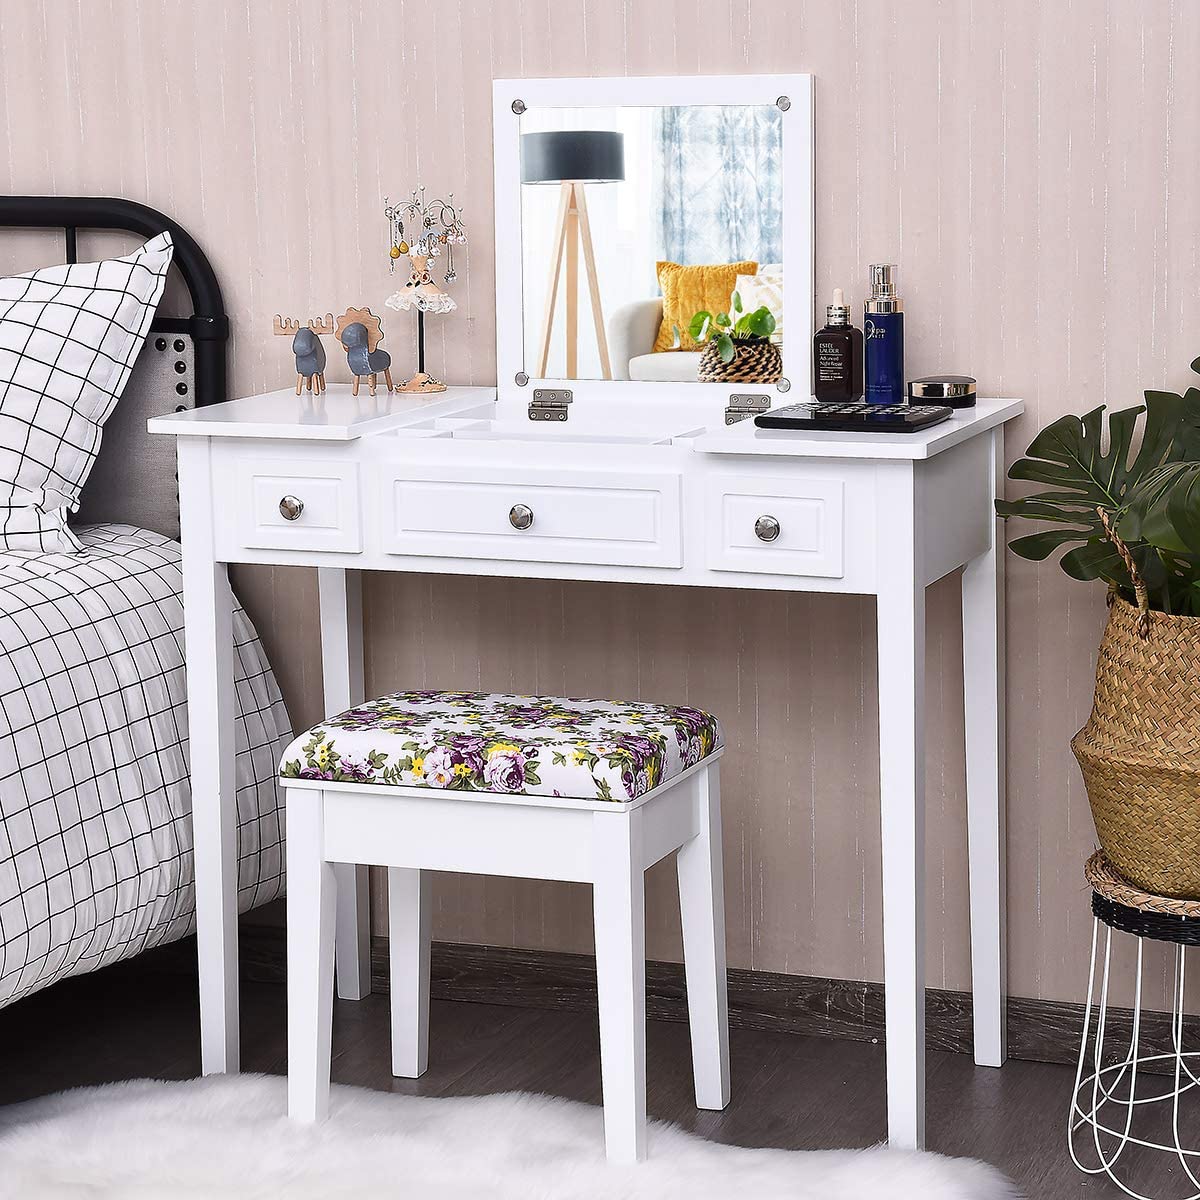 CHARMAID Vanity Set with Flip Top Mirror and 3 Drawers &7 Compartments, White - Giantexus